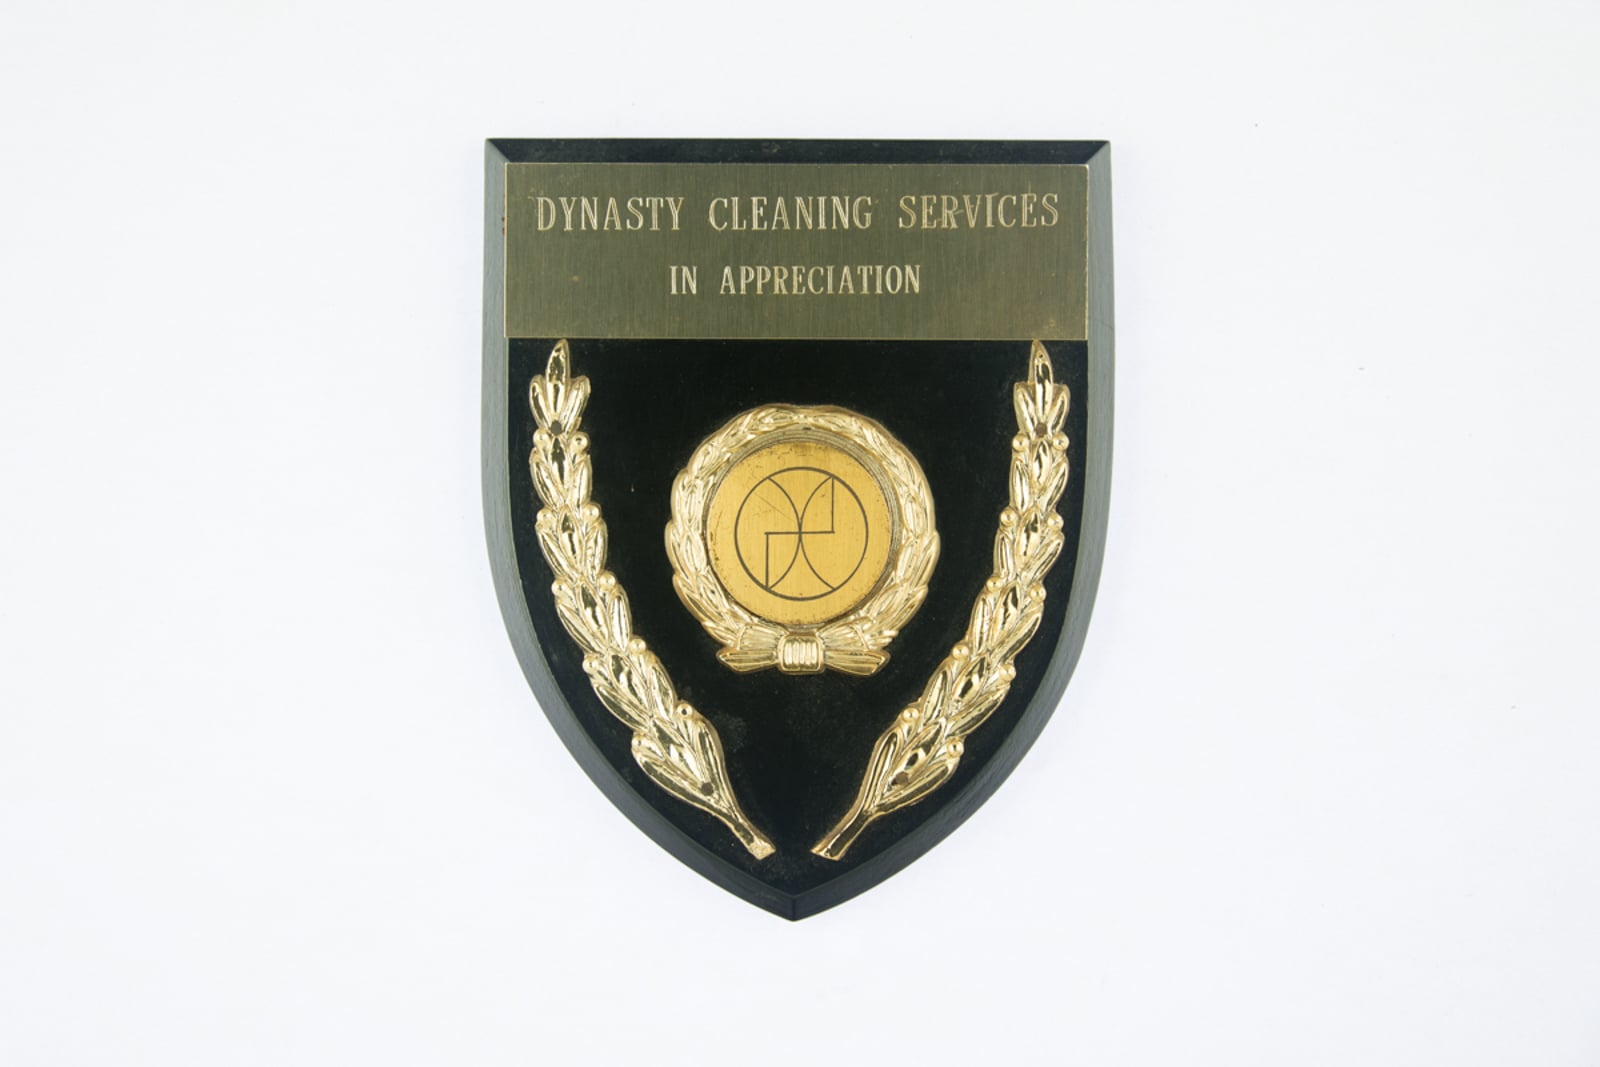 Dynasty Cleaning Services Plaque